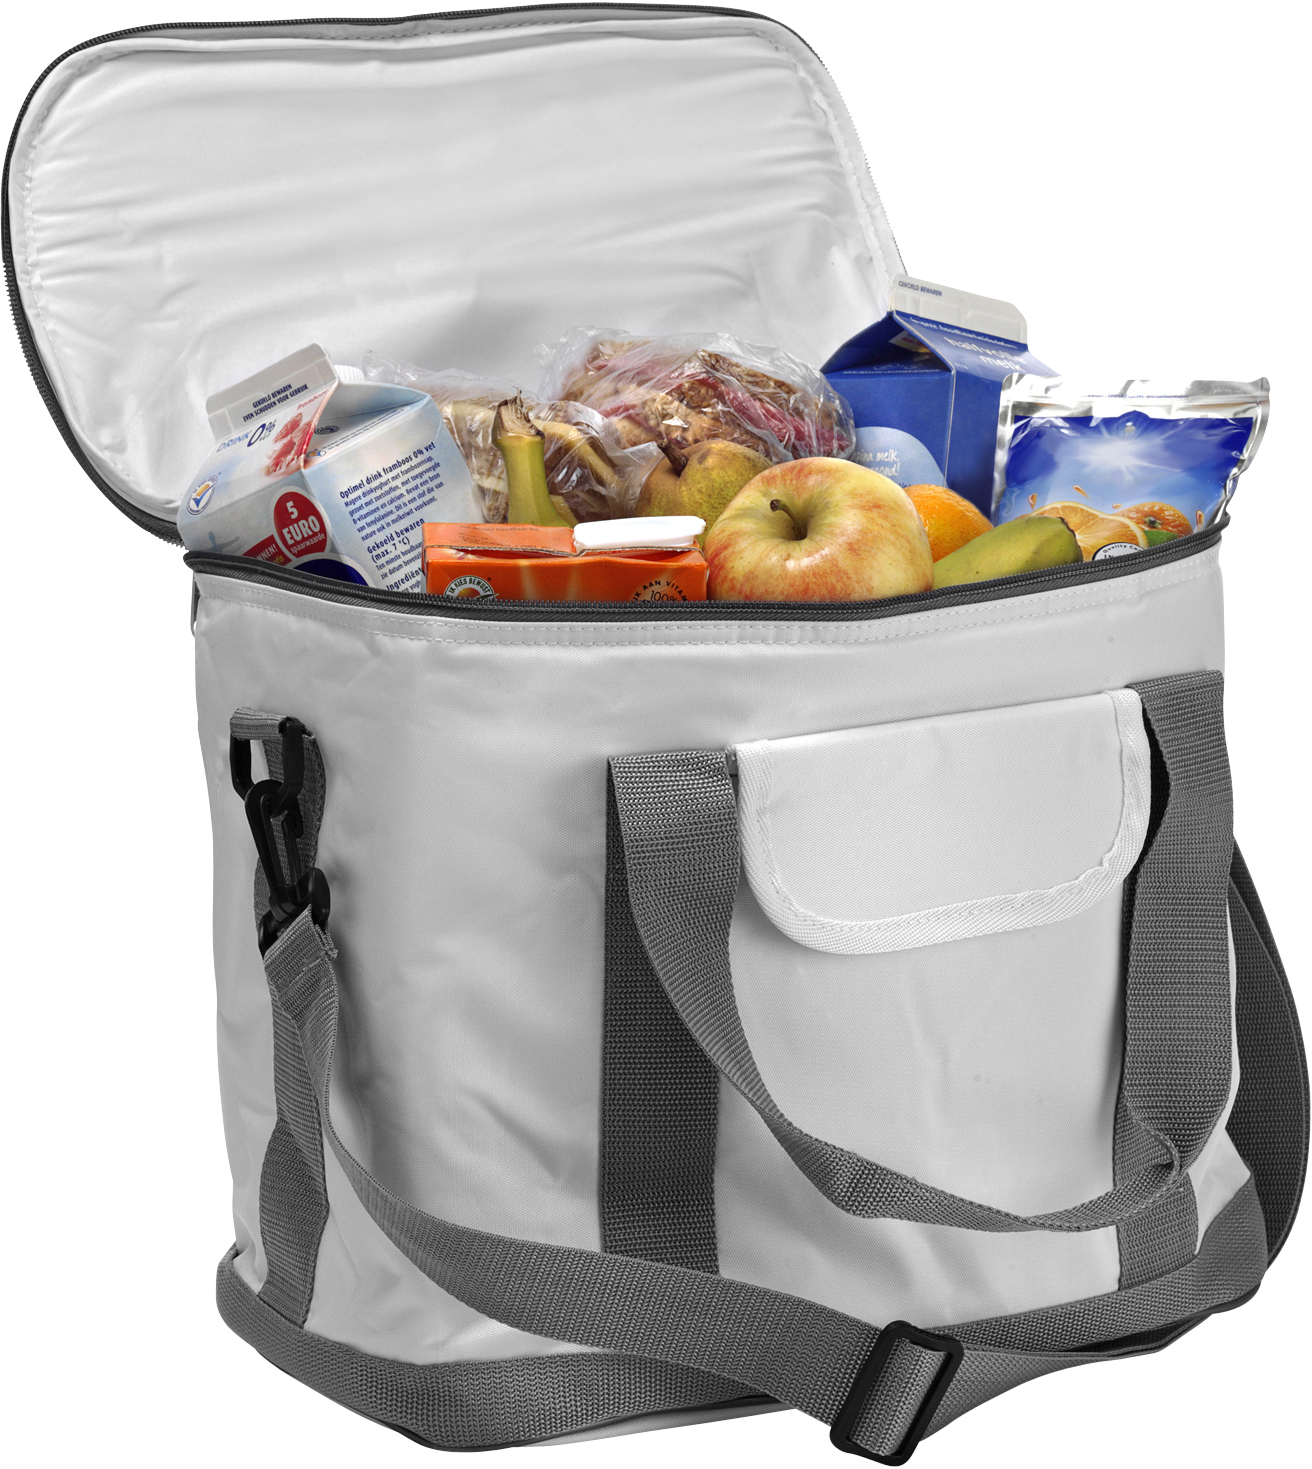 Picnic Cooler Bag  in white with lid open